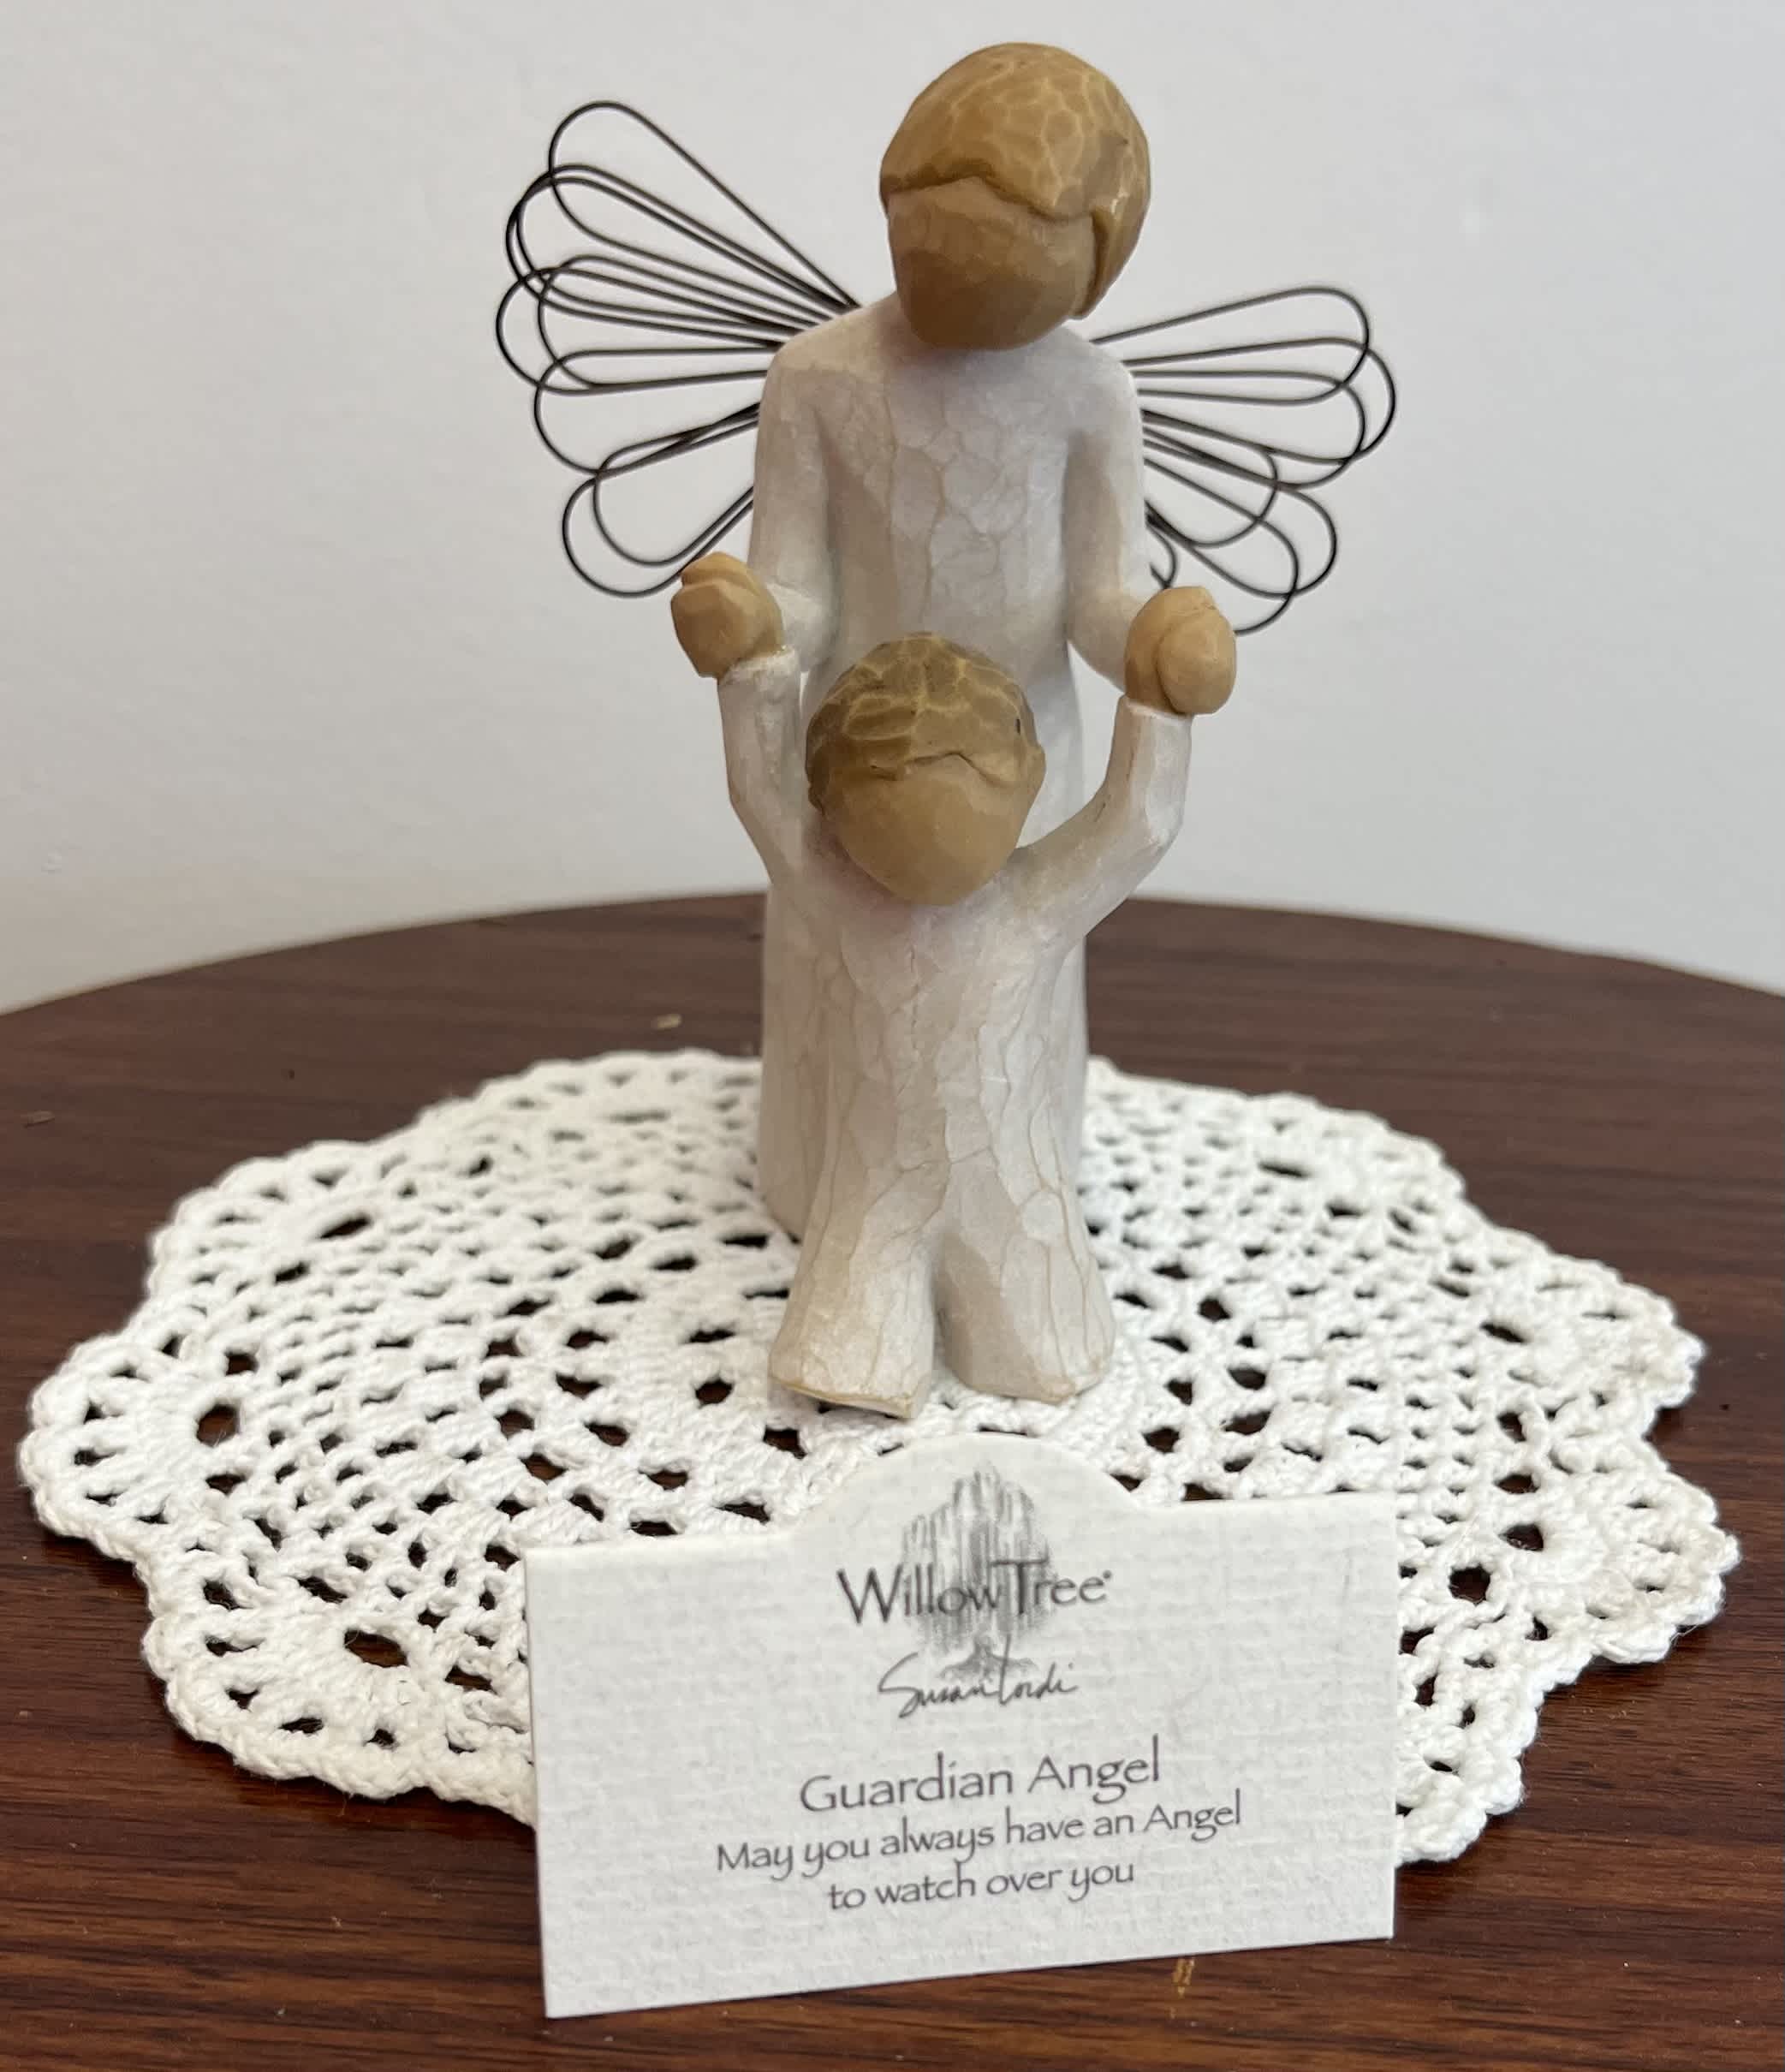 WillowTree Figurine - “Guardian Angel” - The “Guardian Angel” WillowTree figurine. “May you always have an Angel to watch over you”